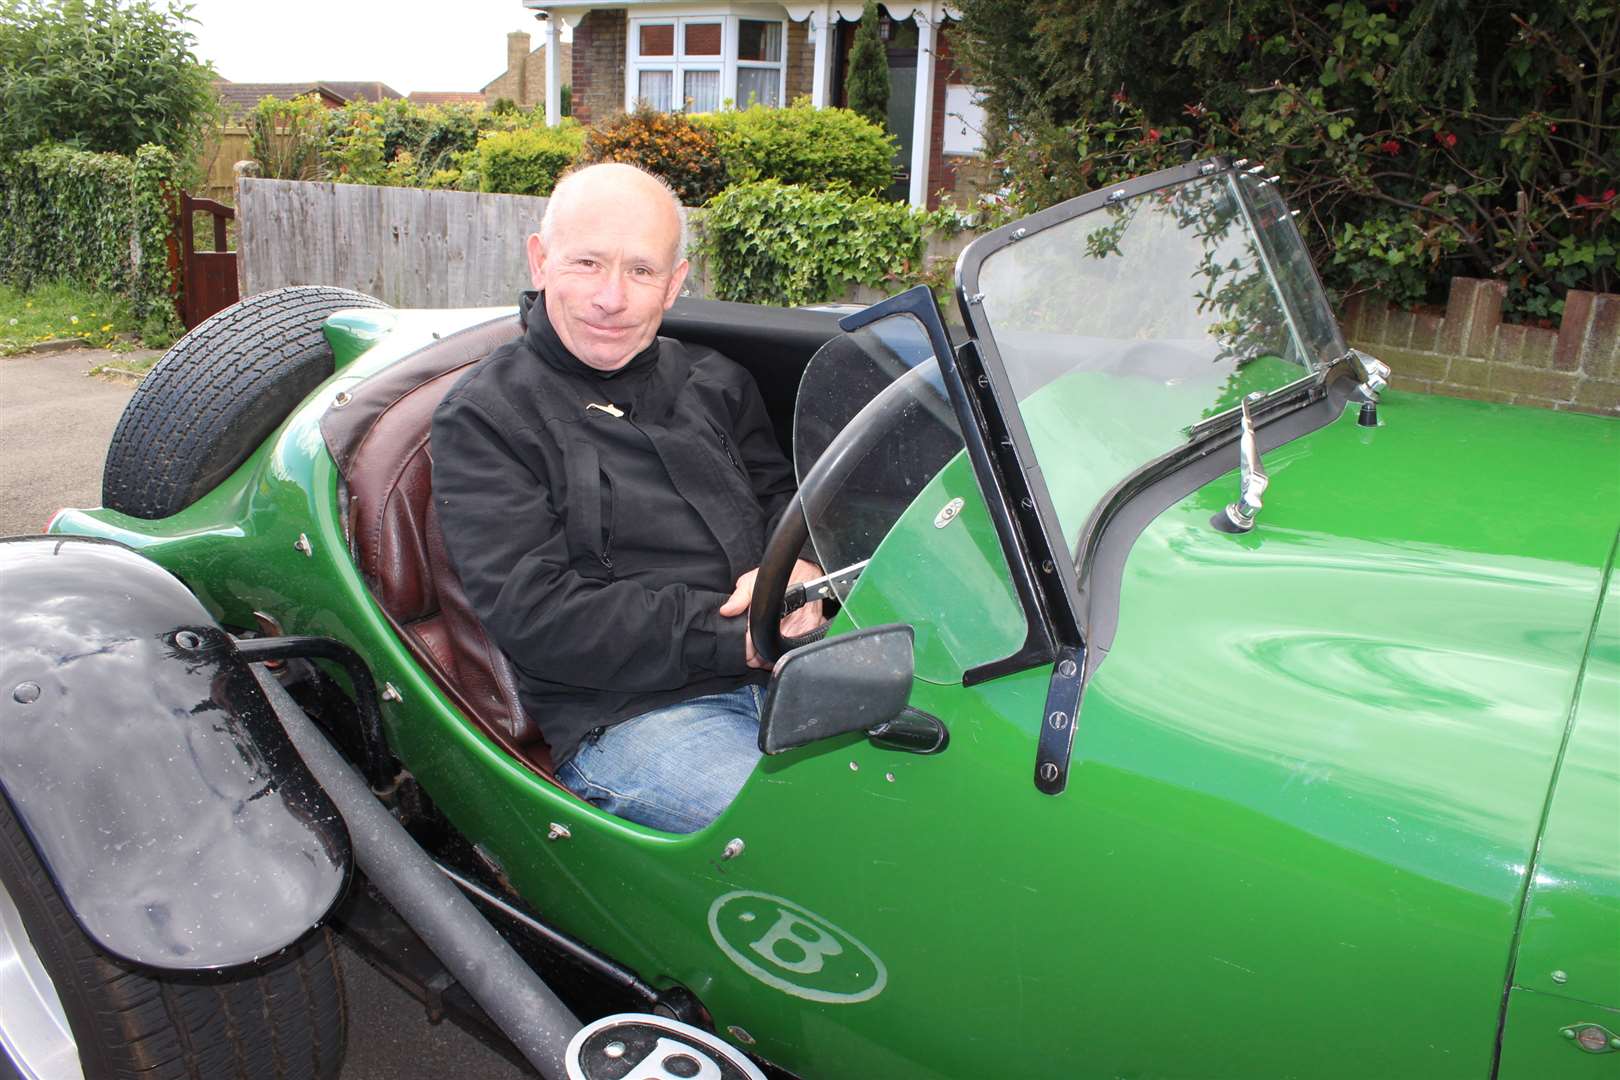 William Wallace who will be exhibiting his rare British Racing Green open-top Bentley at the Sheerness Classic Motor Show.